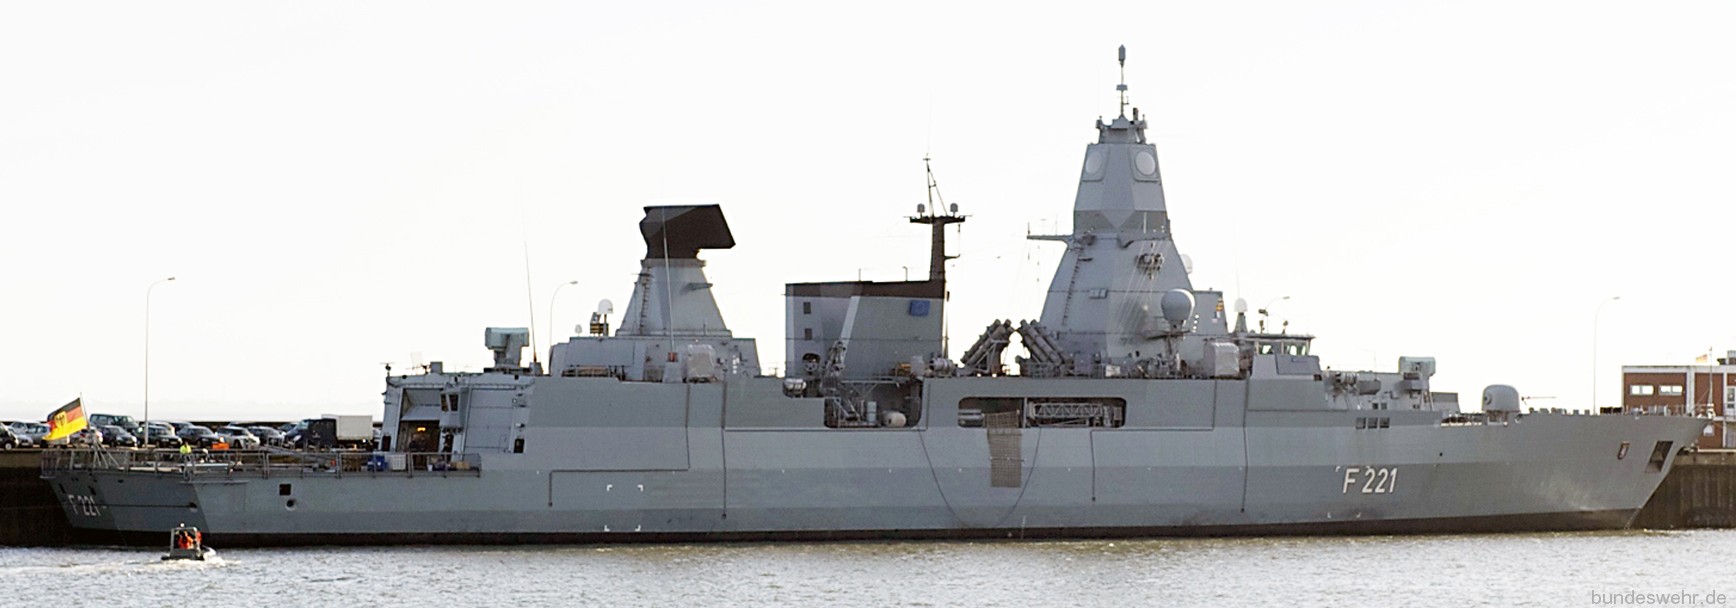 f-221 fgs hessen type 124 sachsen class guided missile frigate german navy 10